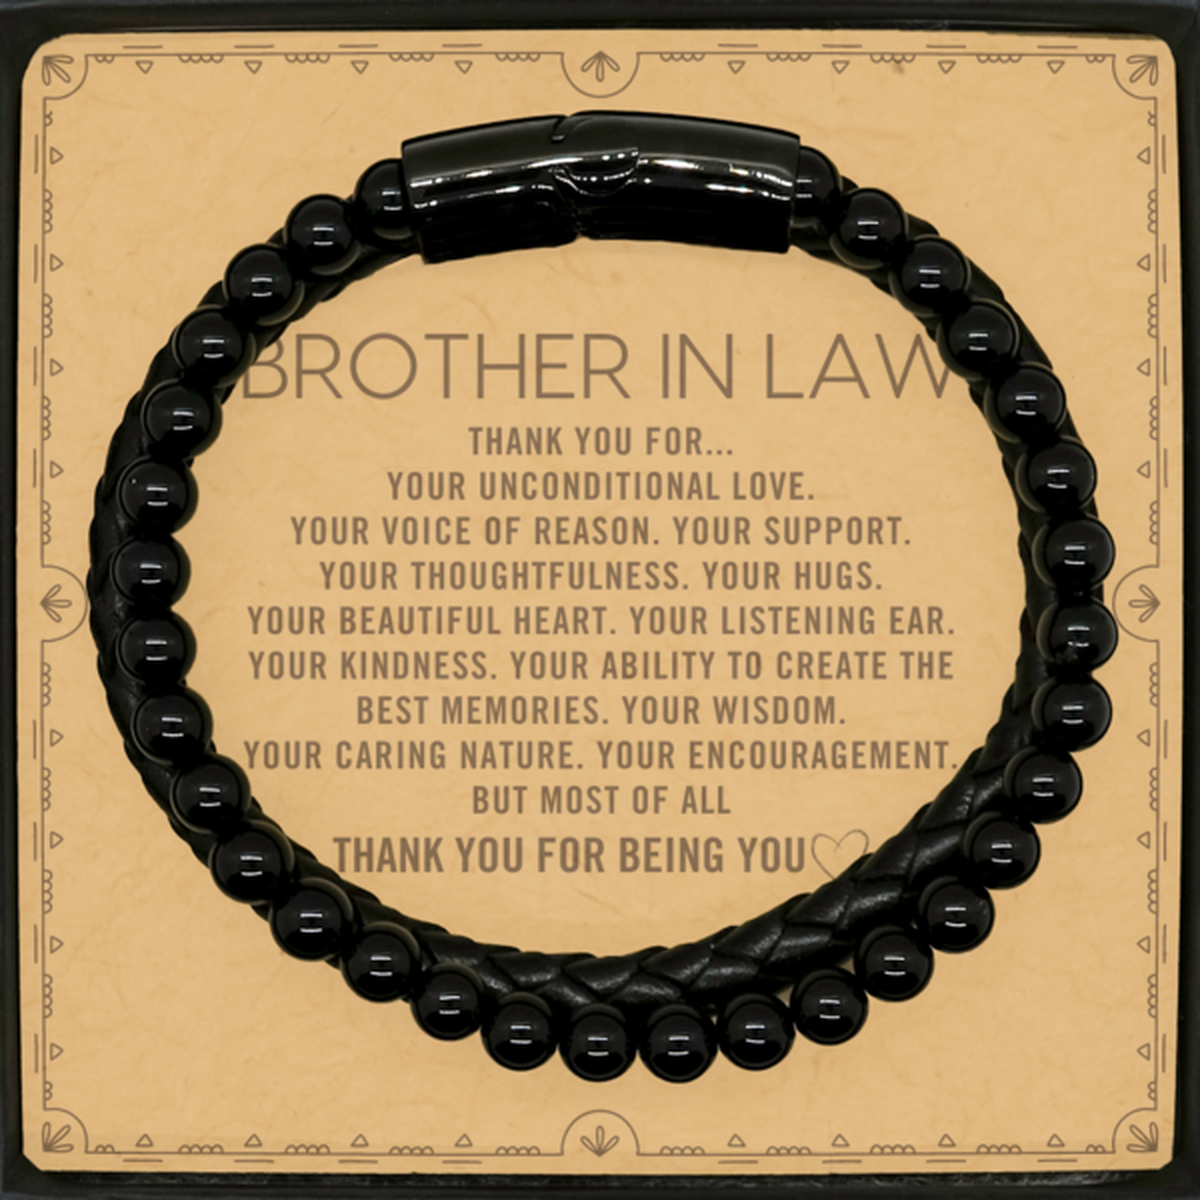 Brother In Law Stone Leather Bracelets Custom, Message Card Gifts For Brother In Law Christmas Graduation Birthday Gifts for Men Women Brother In Law Thank you for Your unconditional love